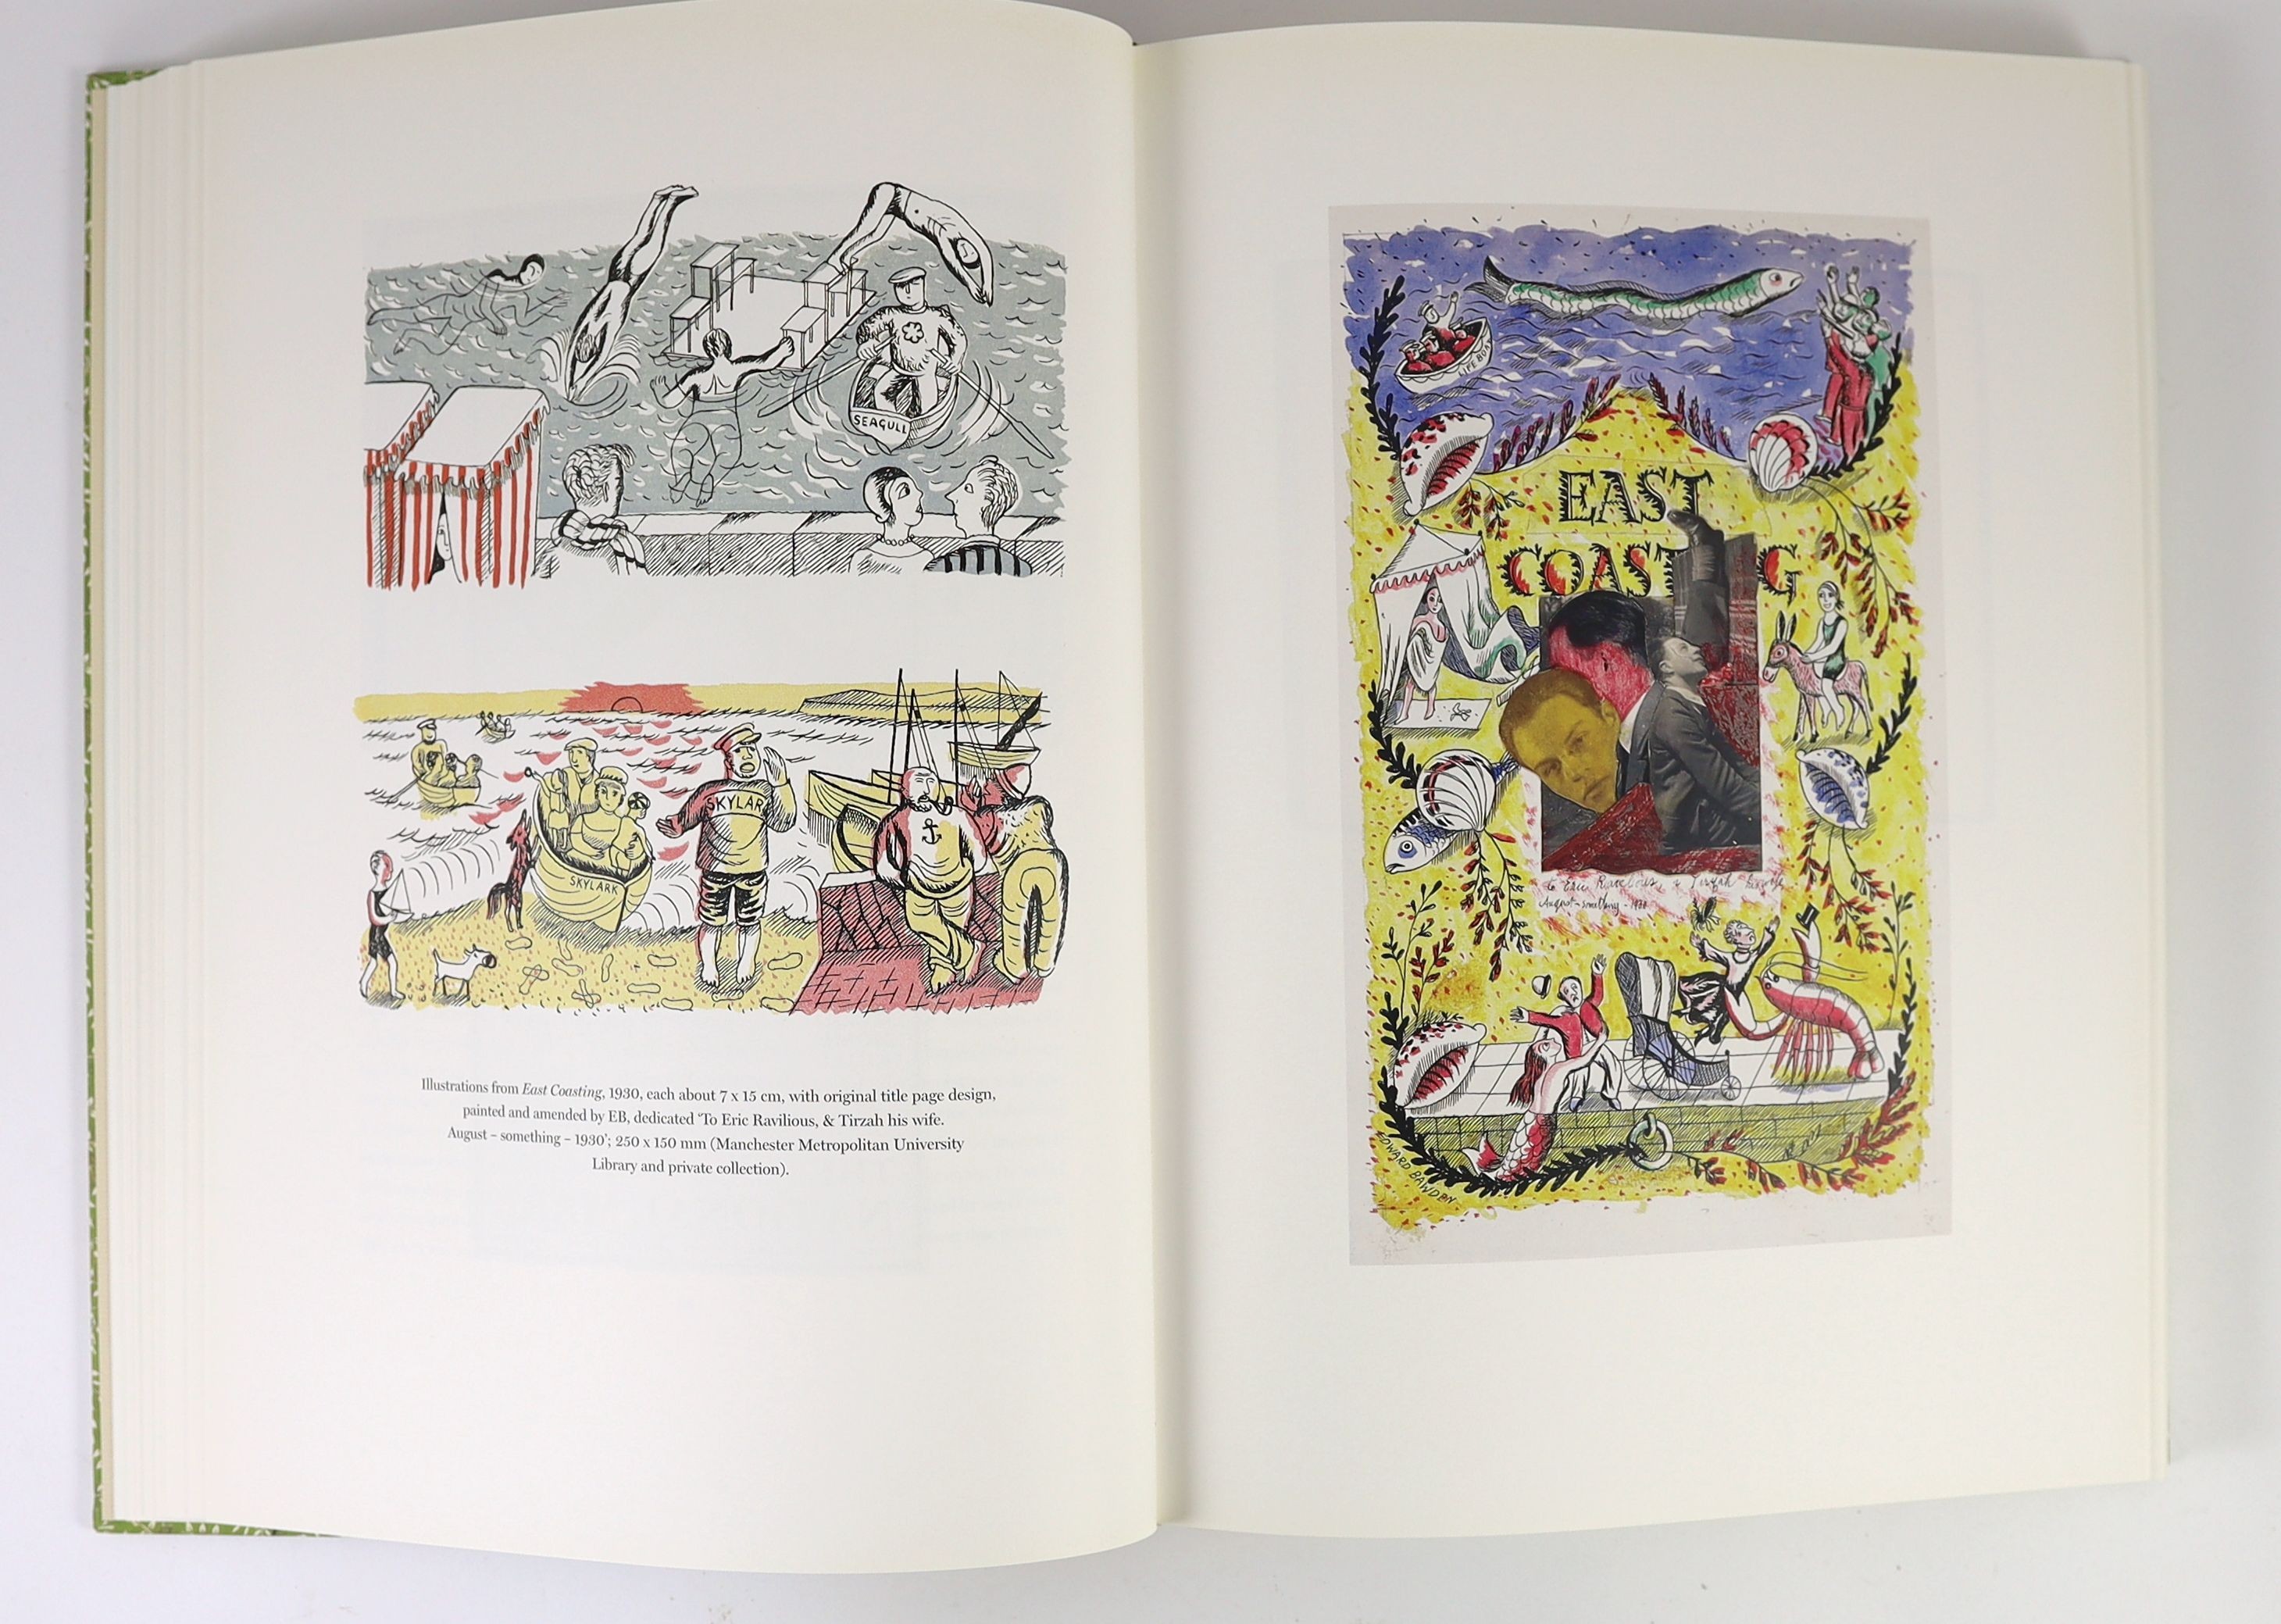 Yorke, Malcolm - The Inward Laugh: Edward Bawden and His Circle, one of 750, large 4to, original quarter brown cloth, The Fleece Press, Upper Denby, 2005